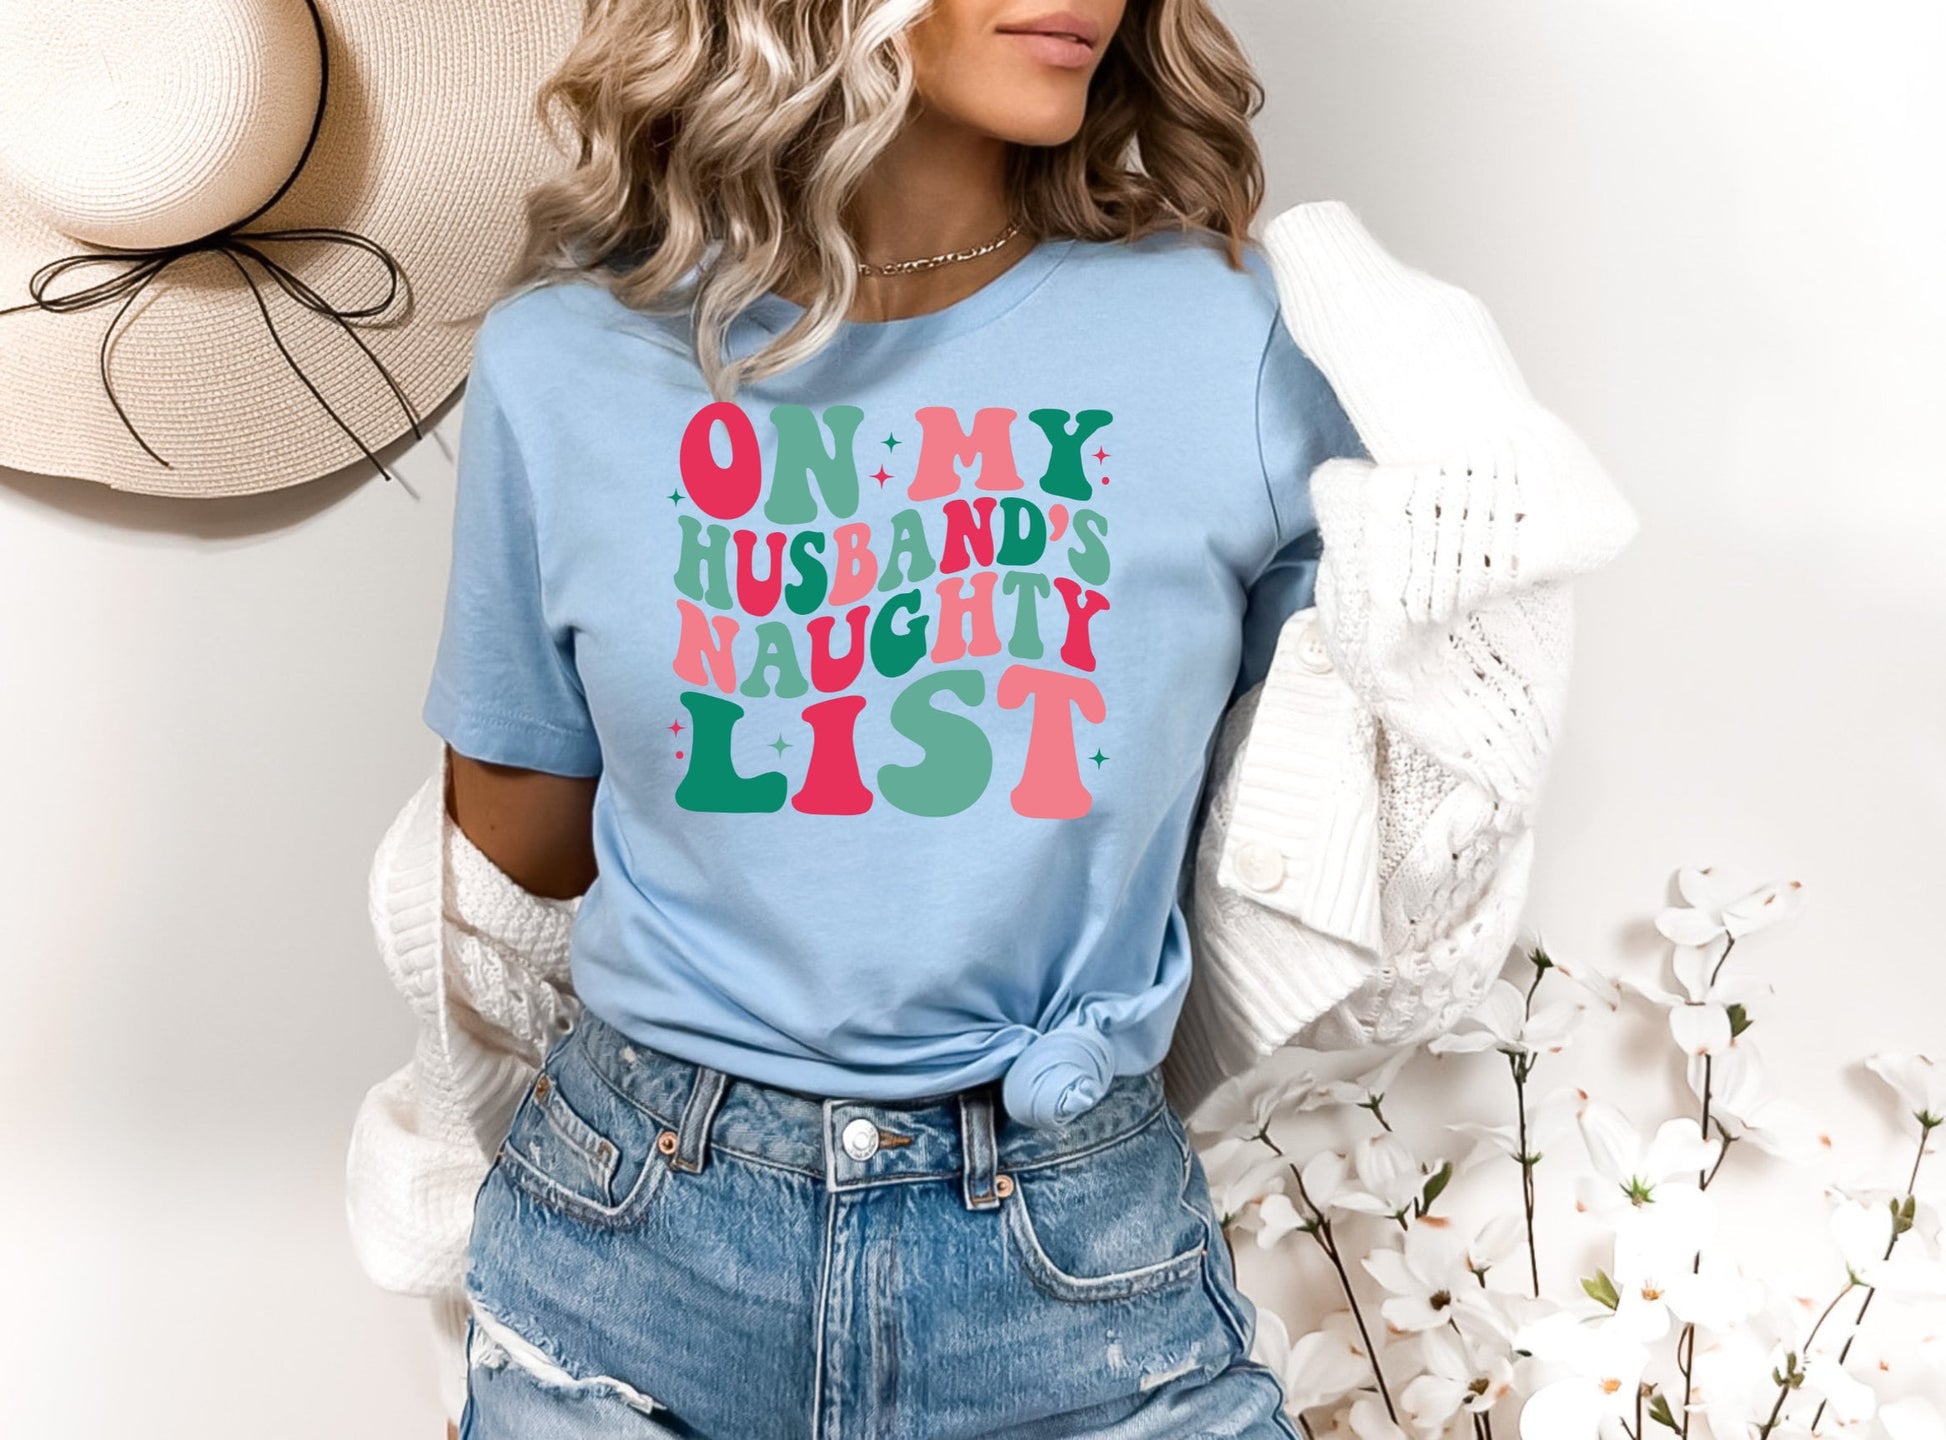 The On My Husbands Naughty List Christmas Shirt Makes the Perfect Gift for Friends, Family, Coworkers or yourself.  Check Out My Shop for even more Great Designs. www.scorpiontees.etsy.com